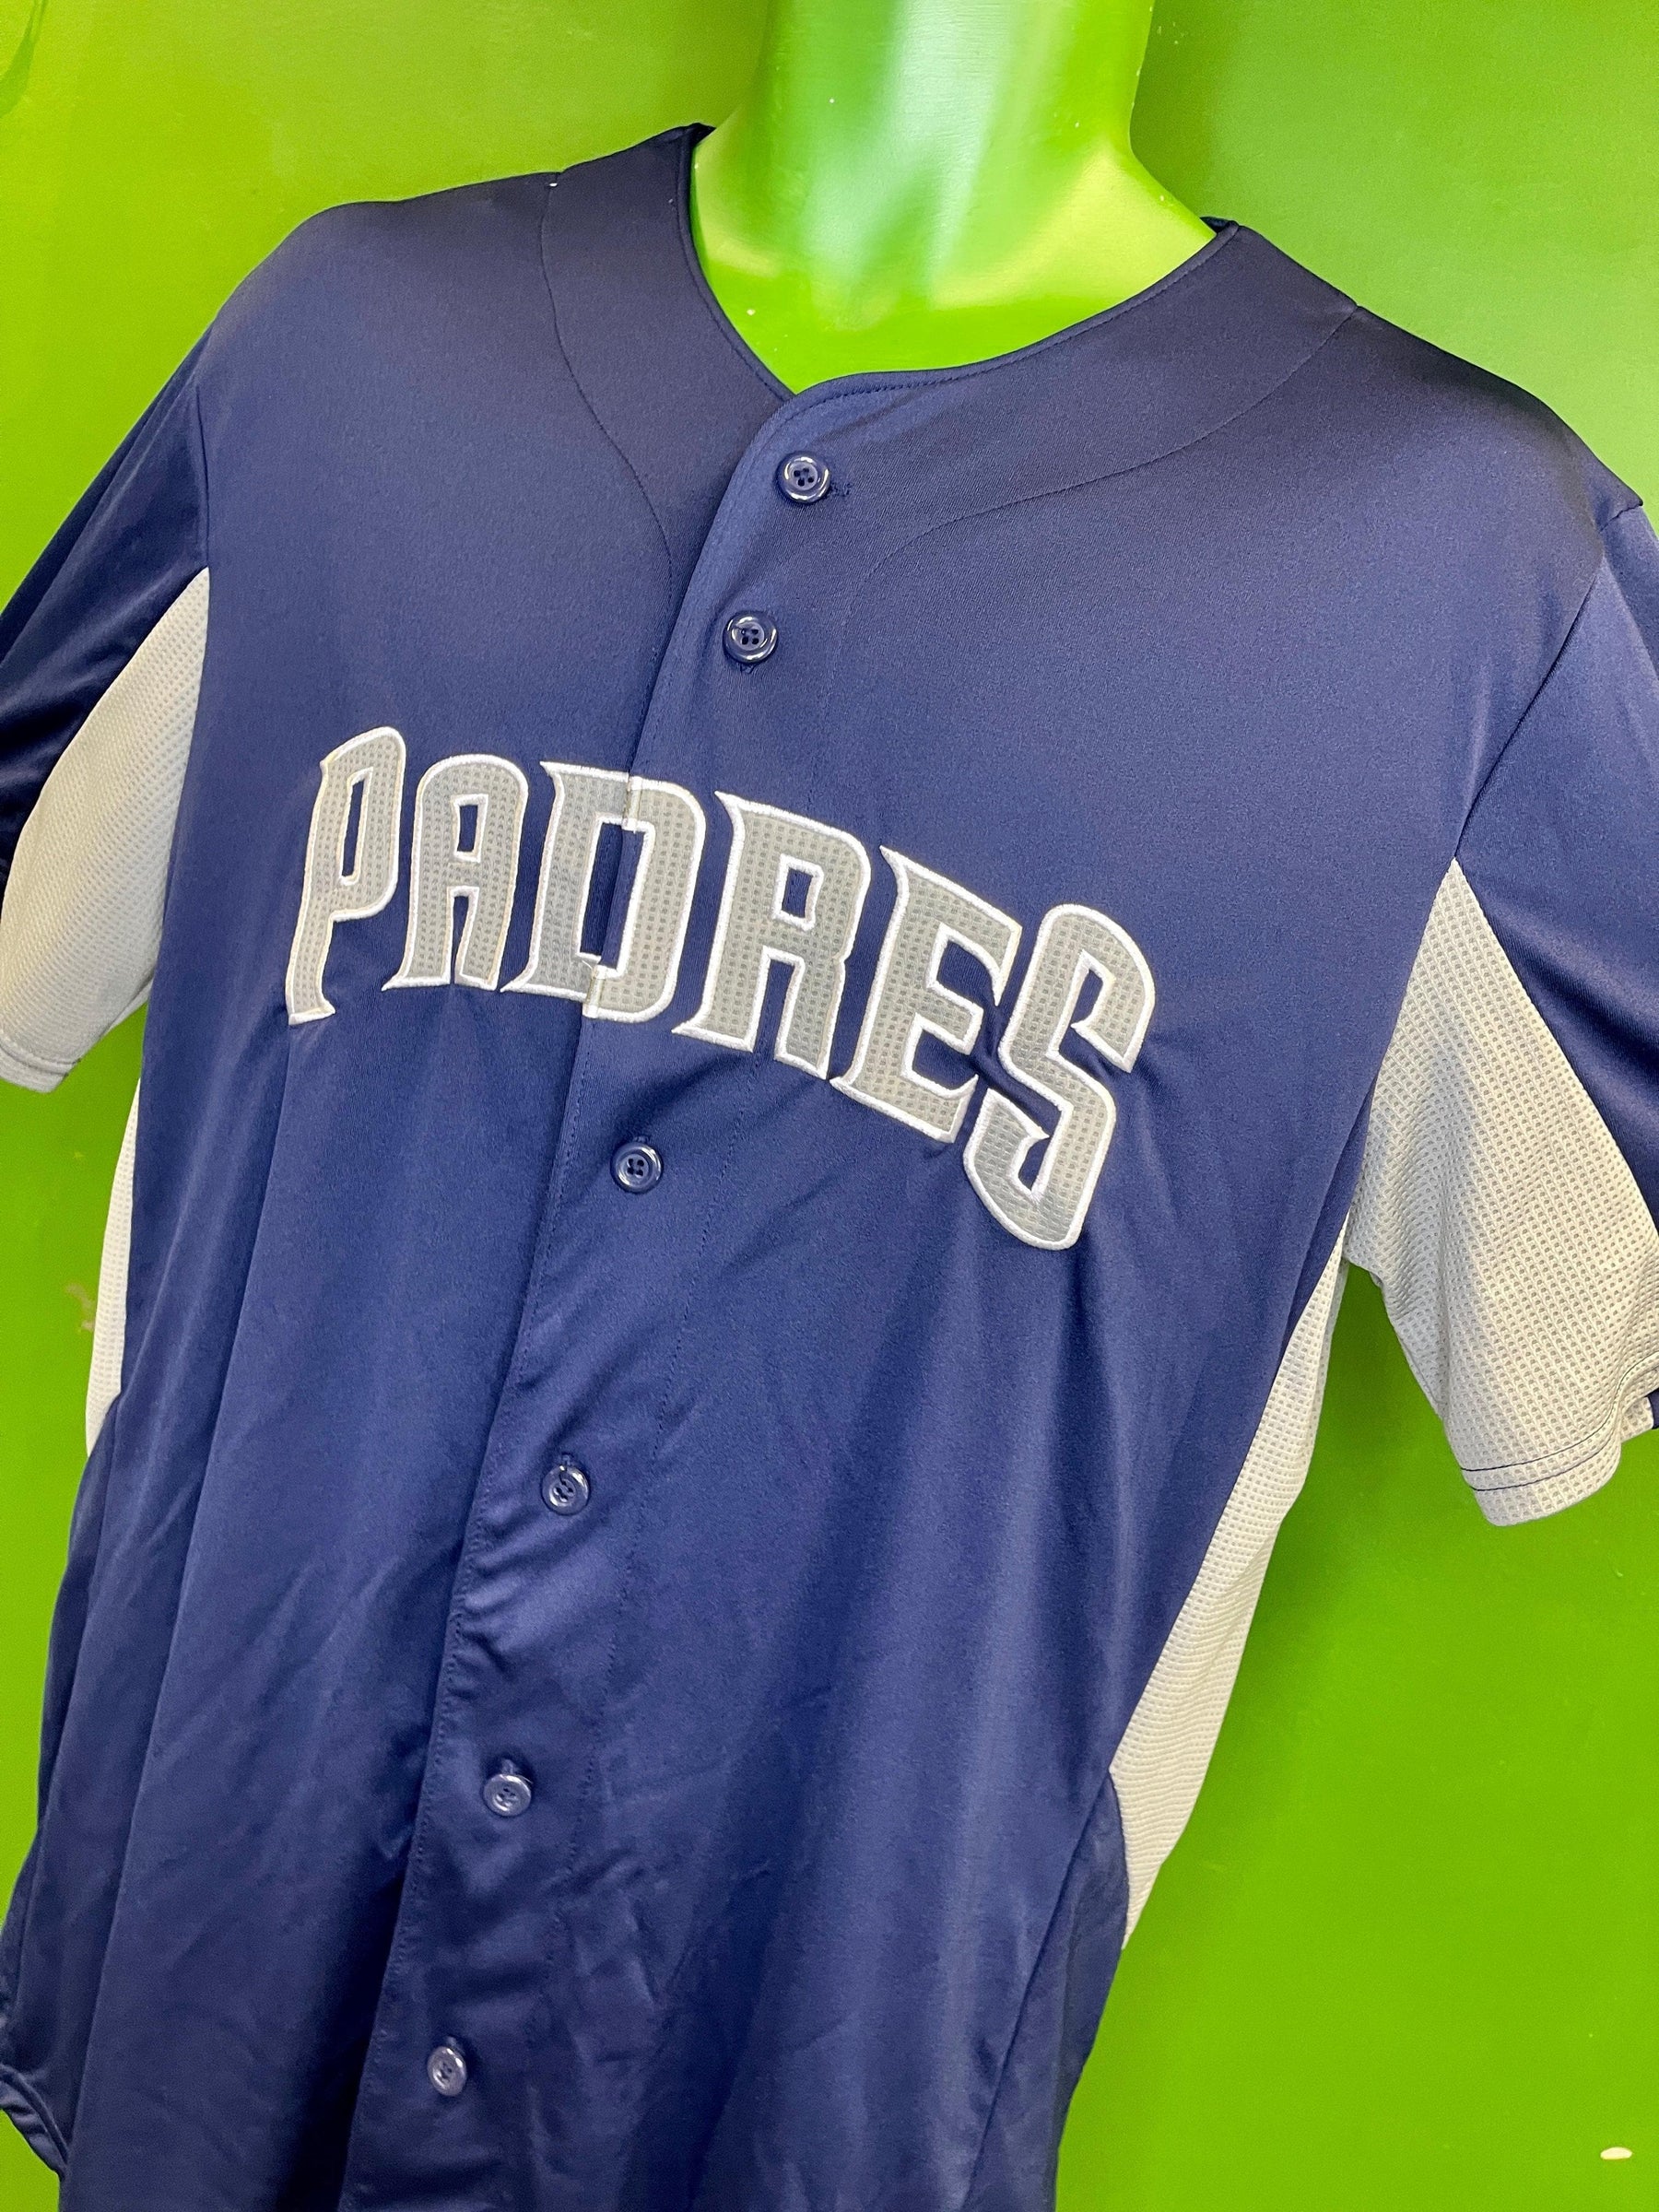 MLB San Diego Padres Men's Button-Down Jersey - S